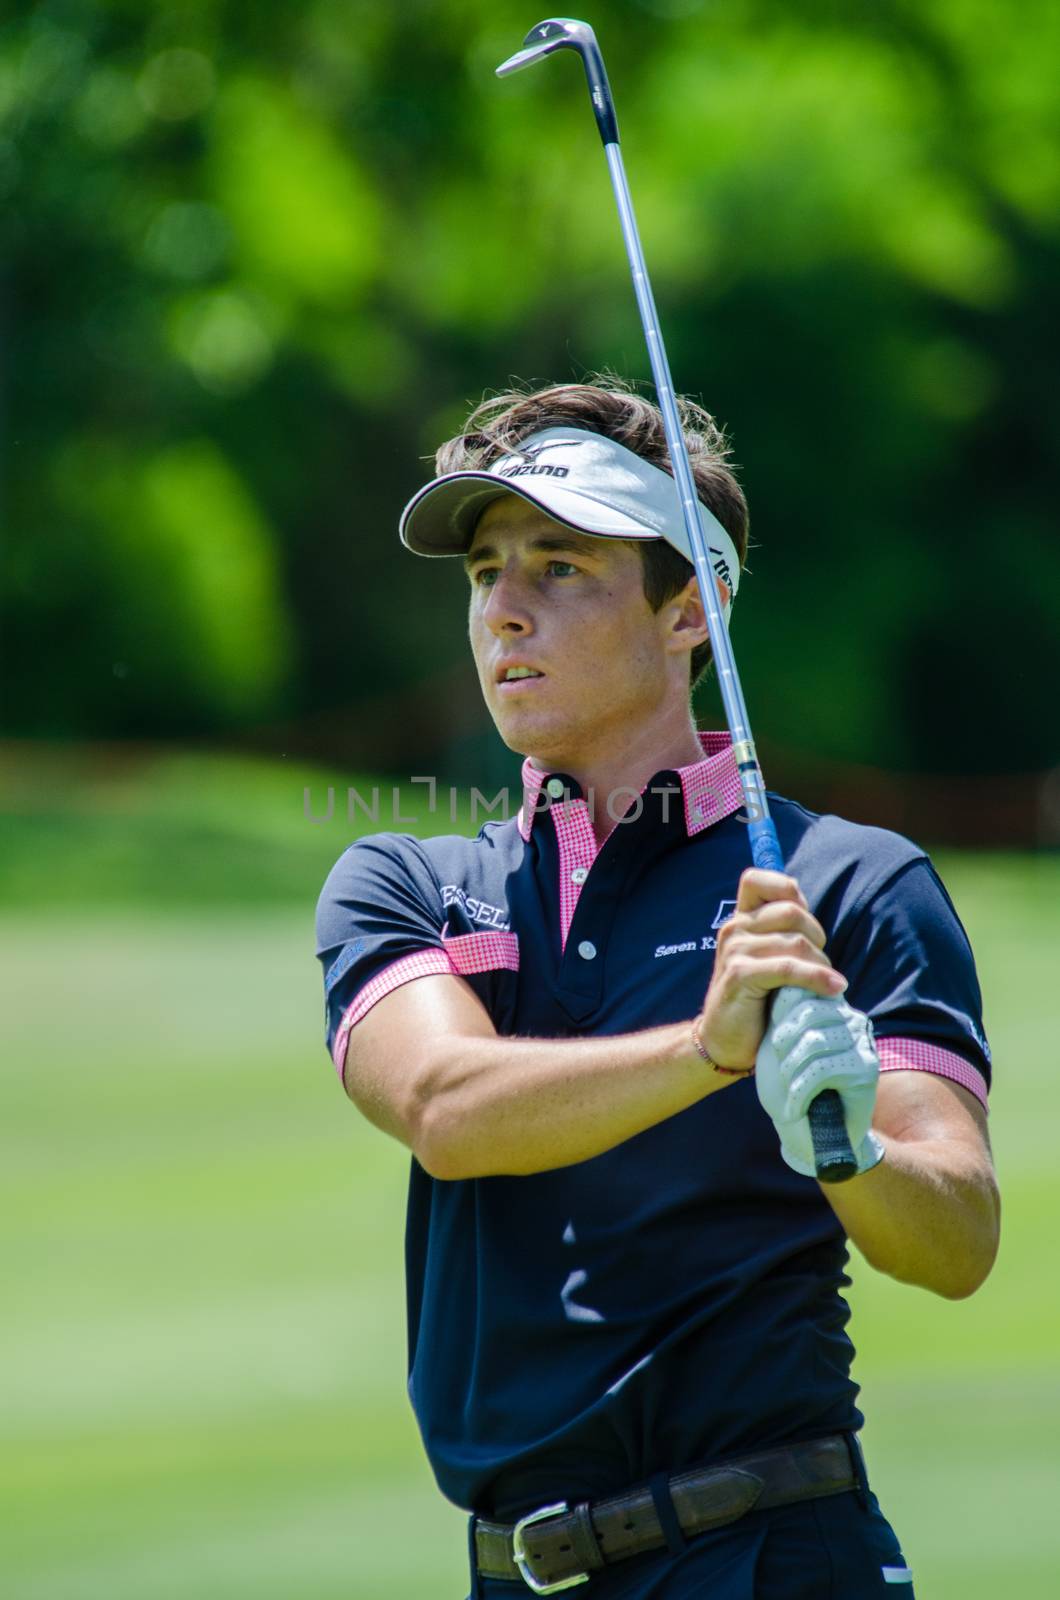 CHONBURI - JULY 31 : Victor Gebhard Osterby of Denmark in King's Cup 2016 at Phoenix Gold Golf & Country Club Pattaya on July 31, 2016 in Chonburi, Thailand.